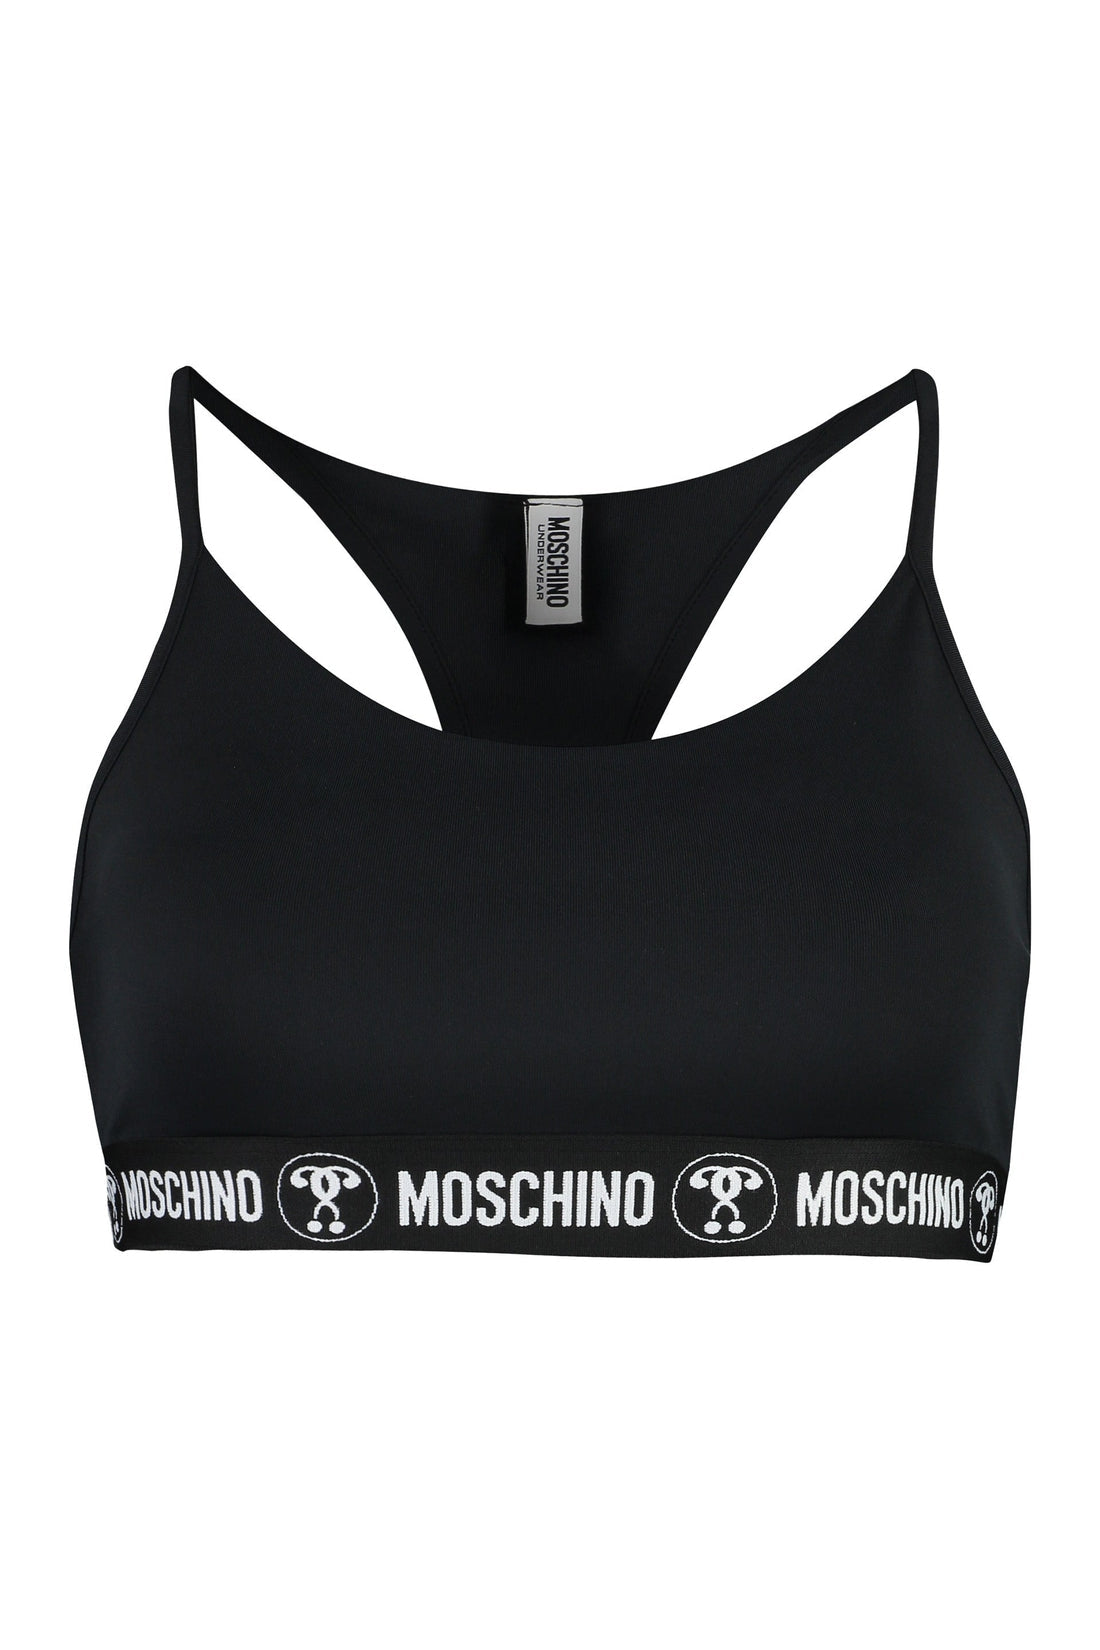 Moschino-OUTLET-SALE-Logoed elastic top bra-ARCHIVIST